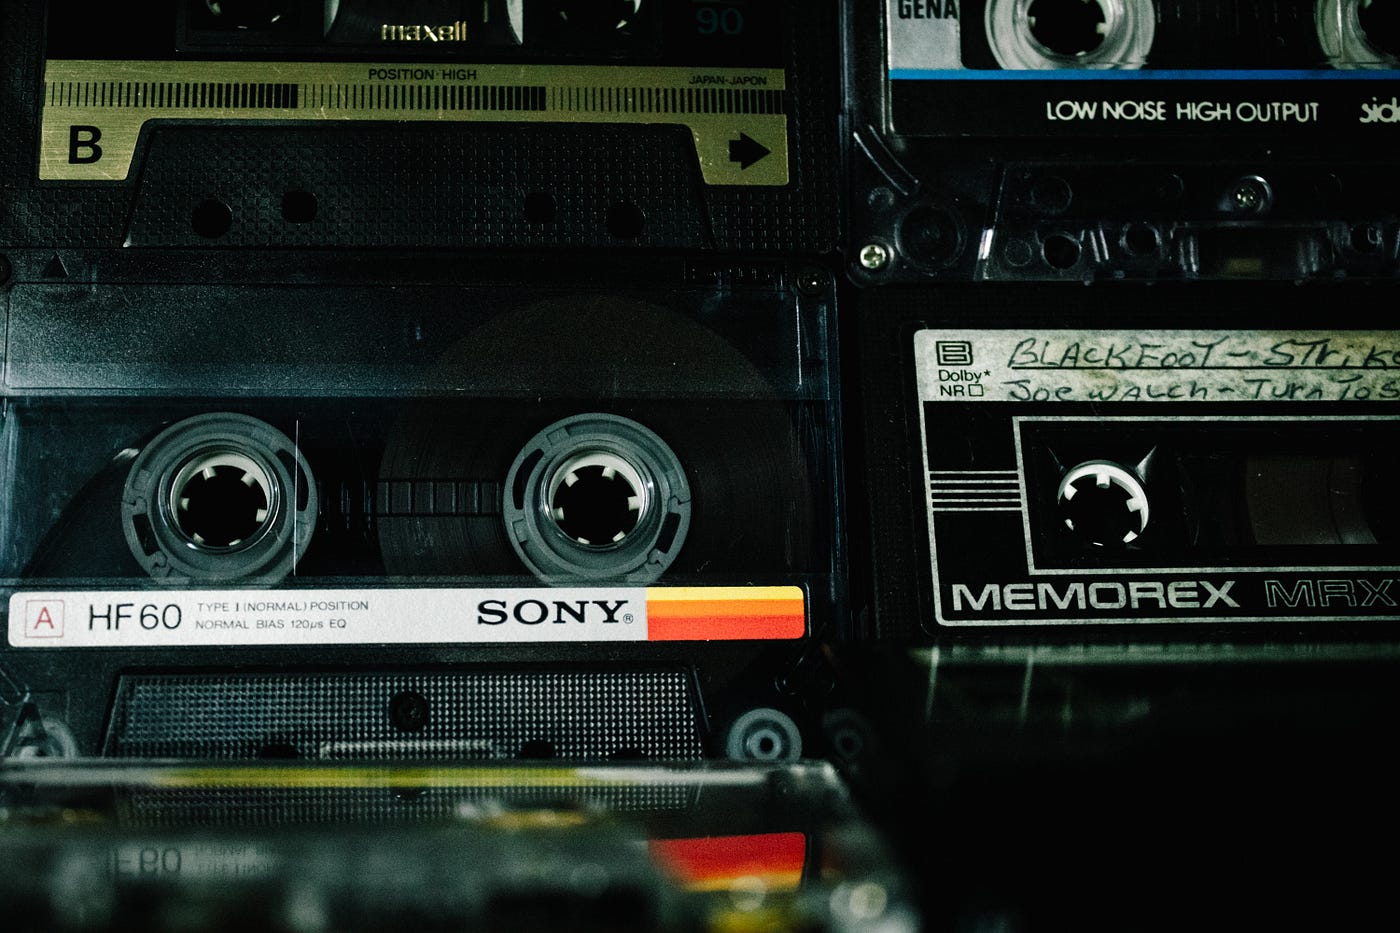 Cassette Tape Technology and Its Impacts on U.S. Culture, by S. Murdy